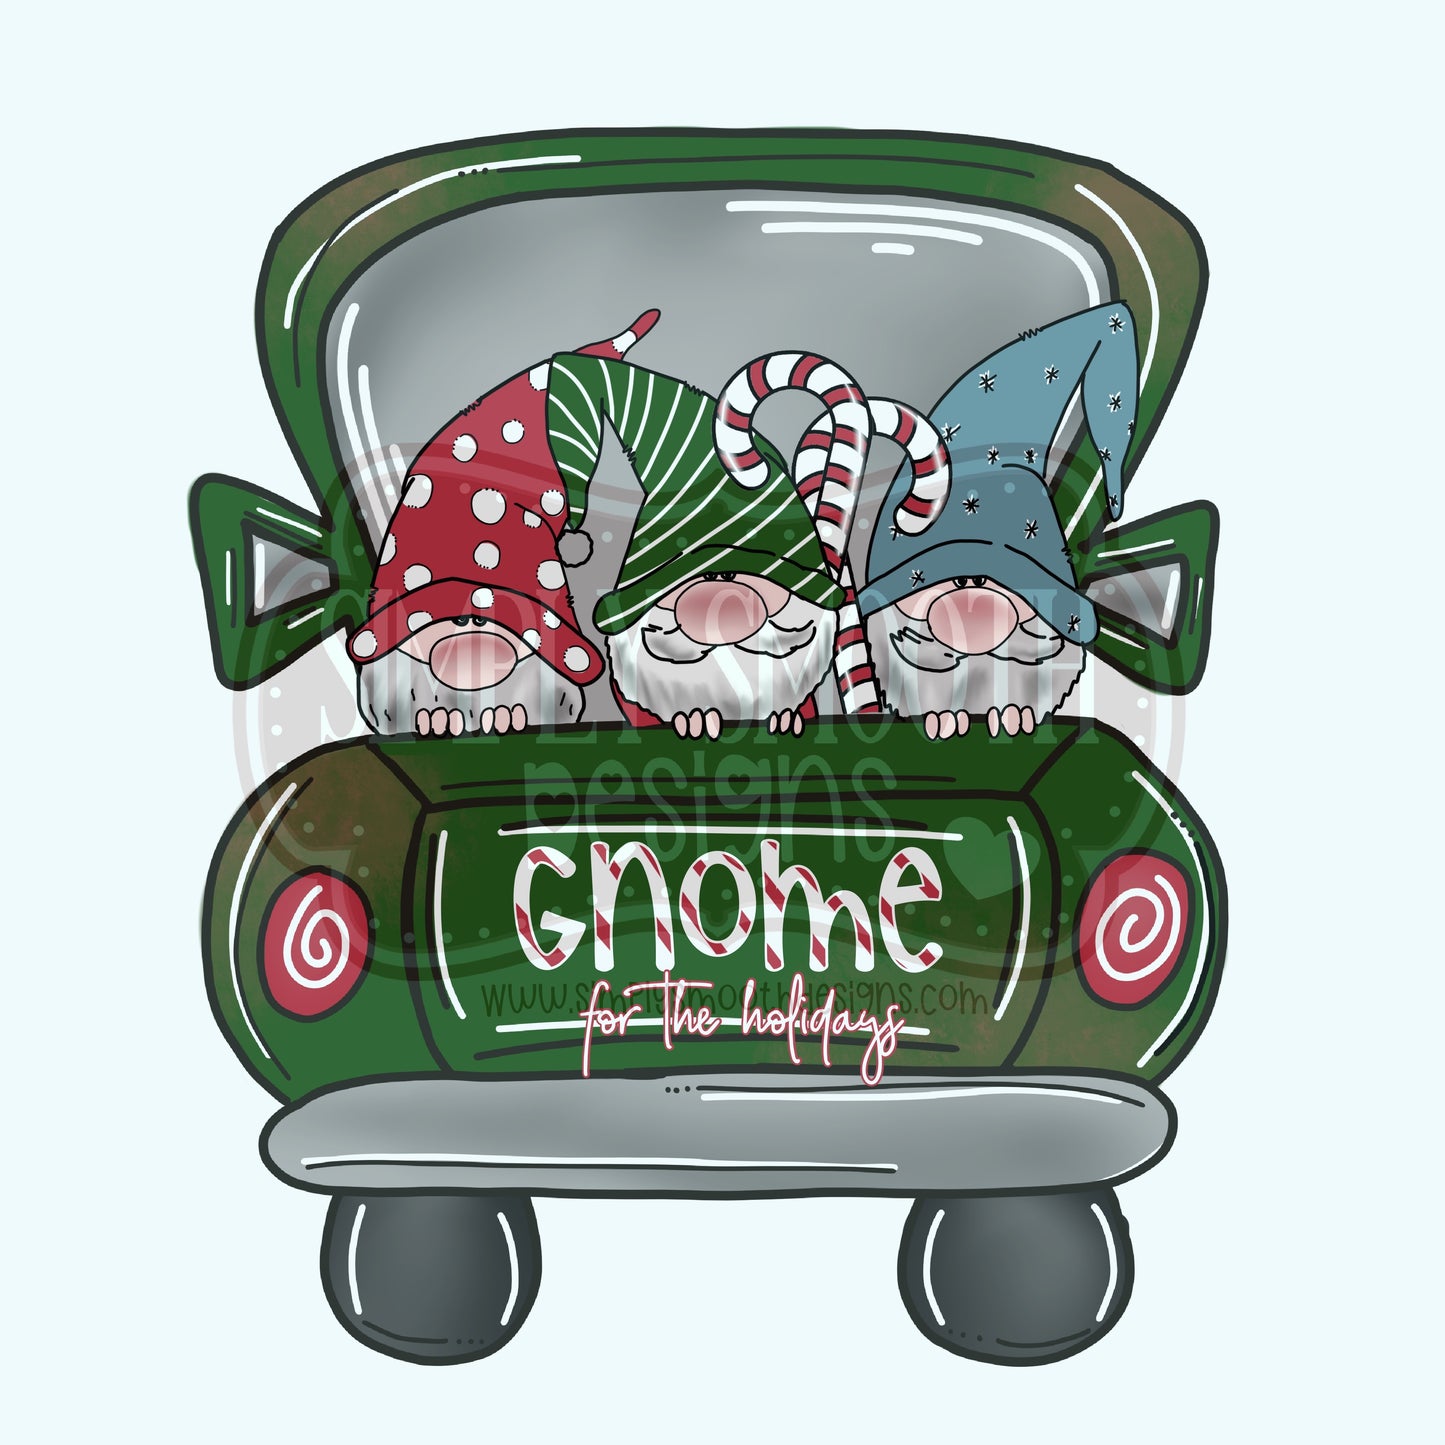 Gnome for the holidays truck